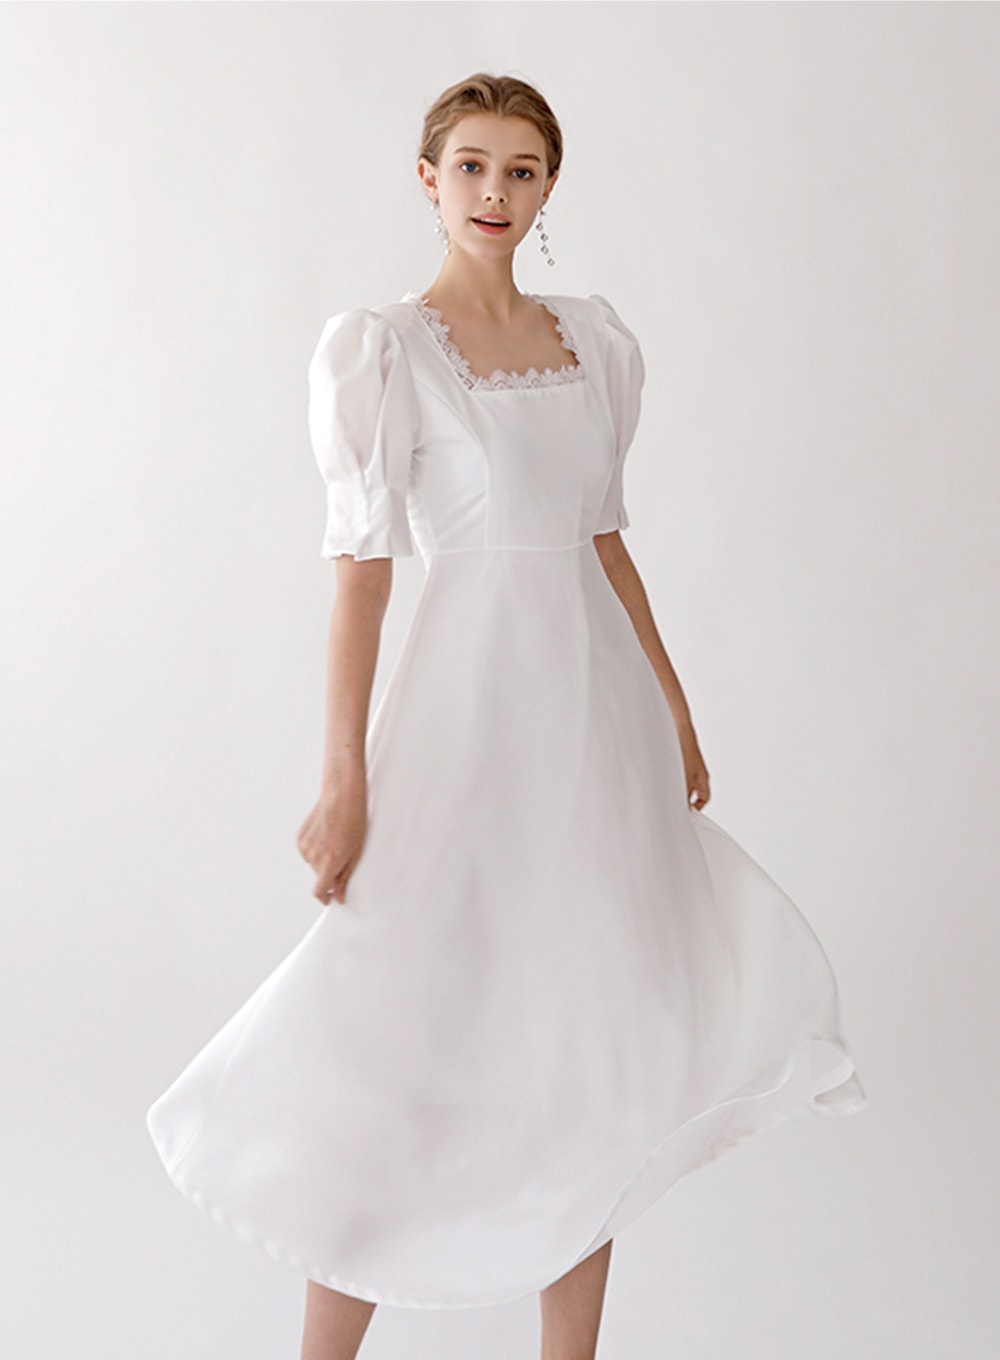 Lace Square-neck Wedding Party Dress IA13